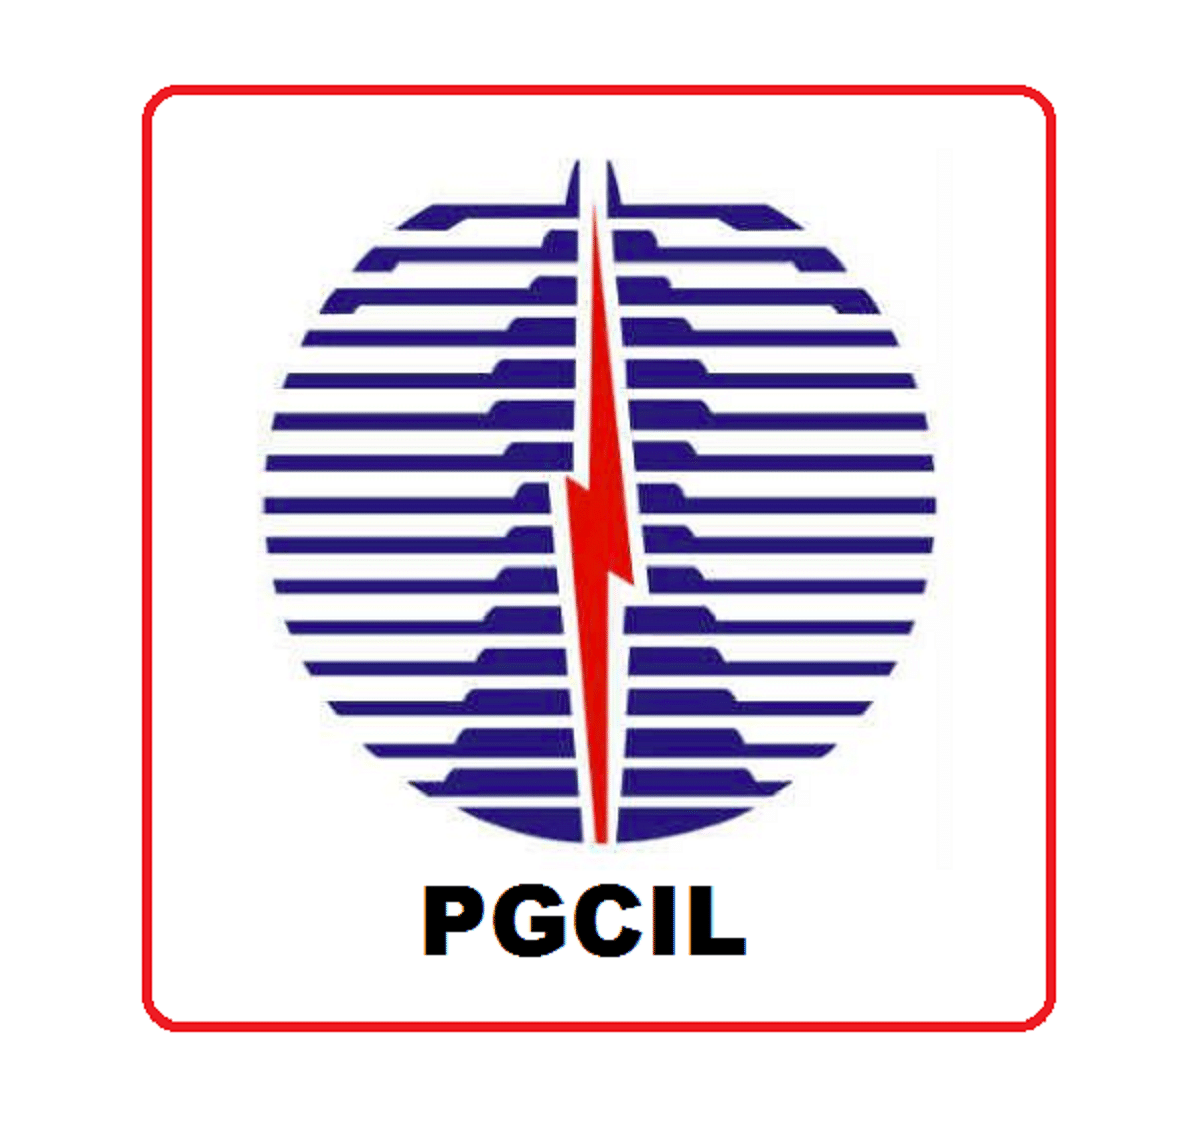 PGCIL Executive (HR) Apprentice Recruitment 2020 for 33 Posts, Apply Before August 31